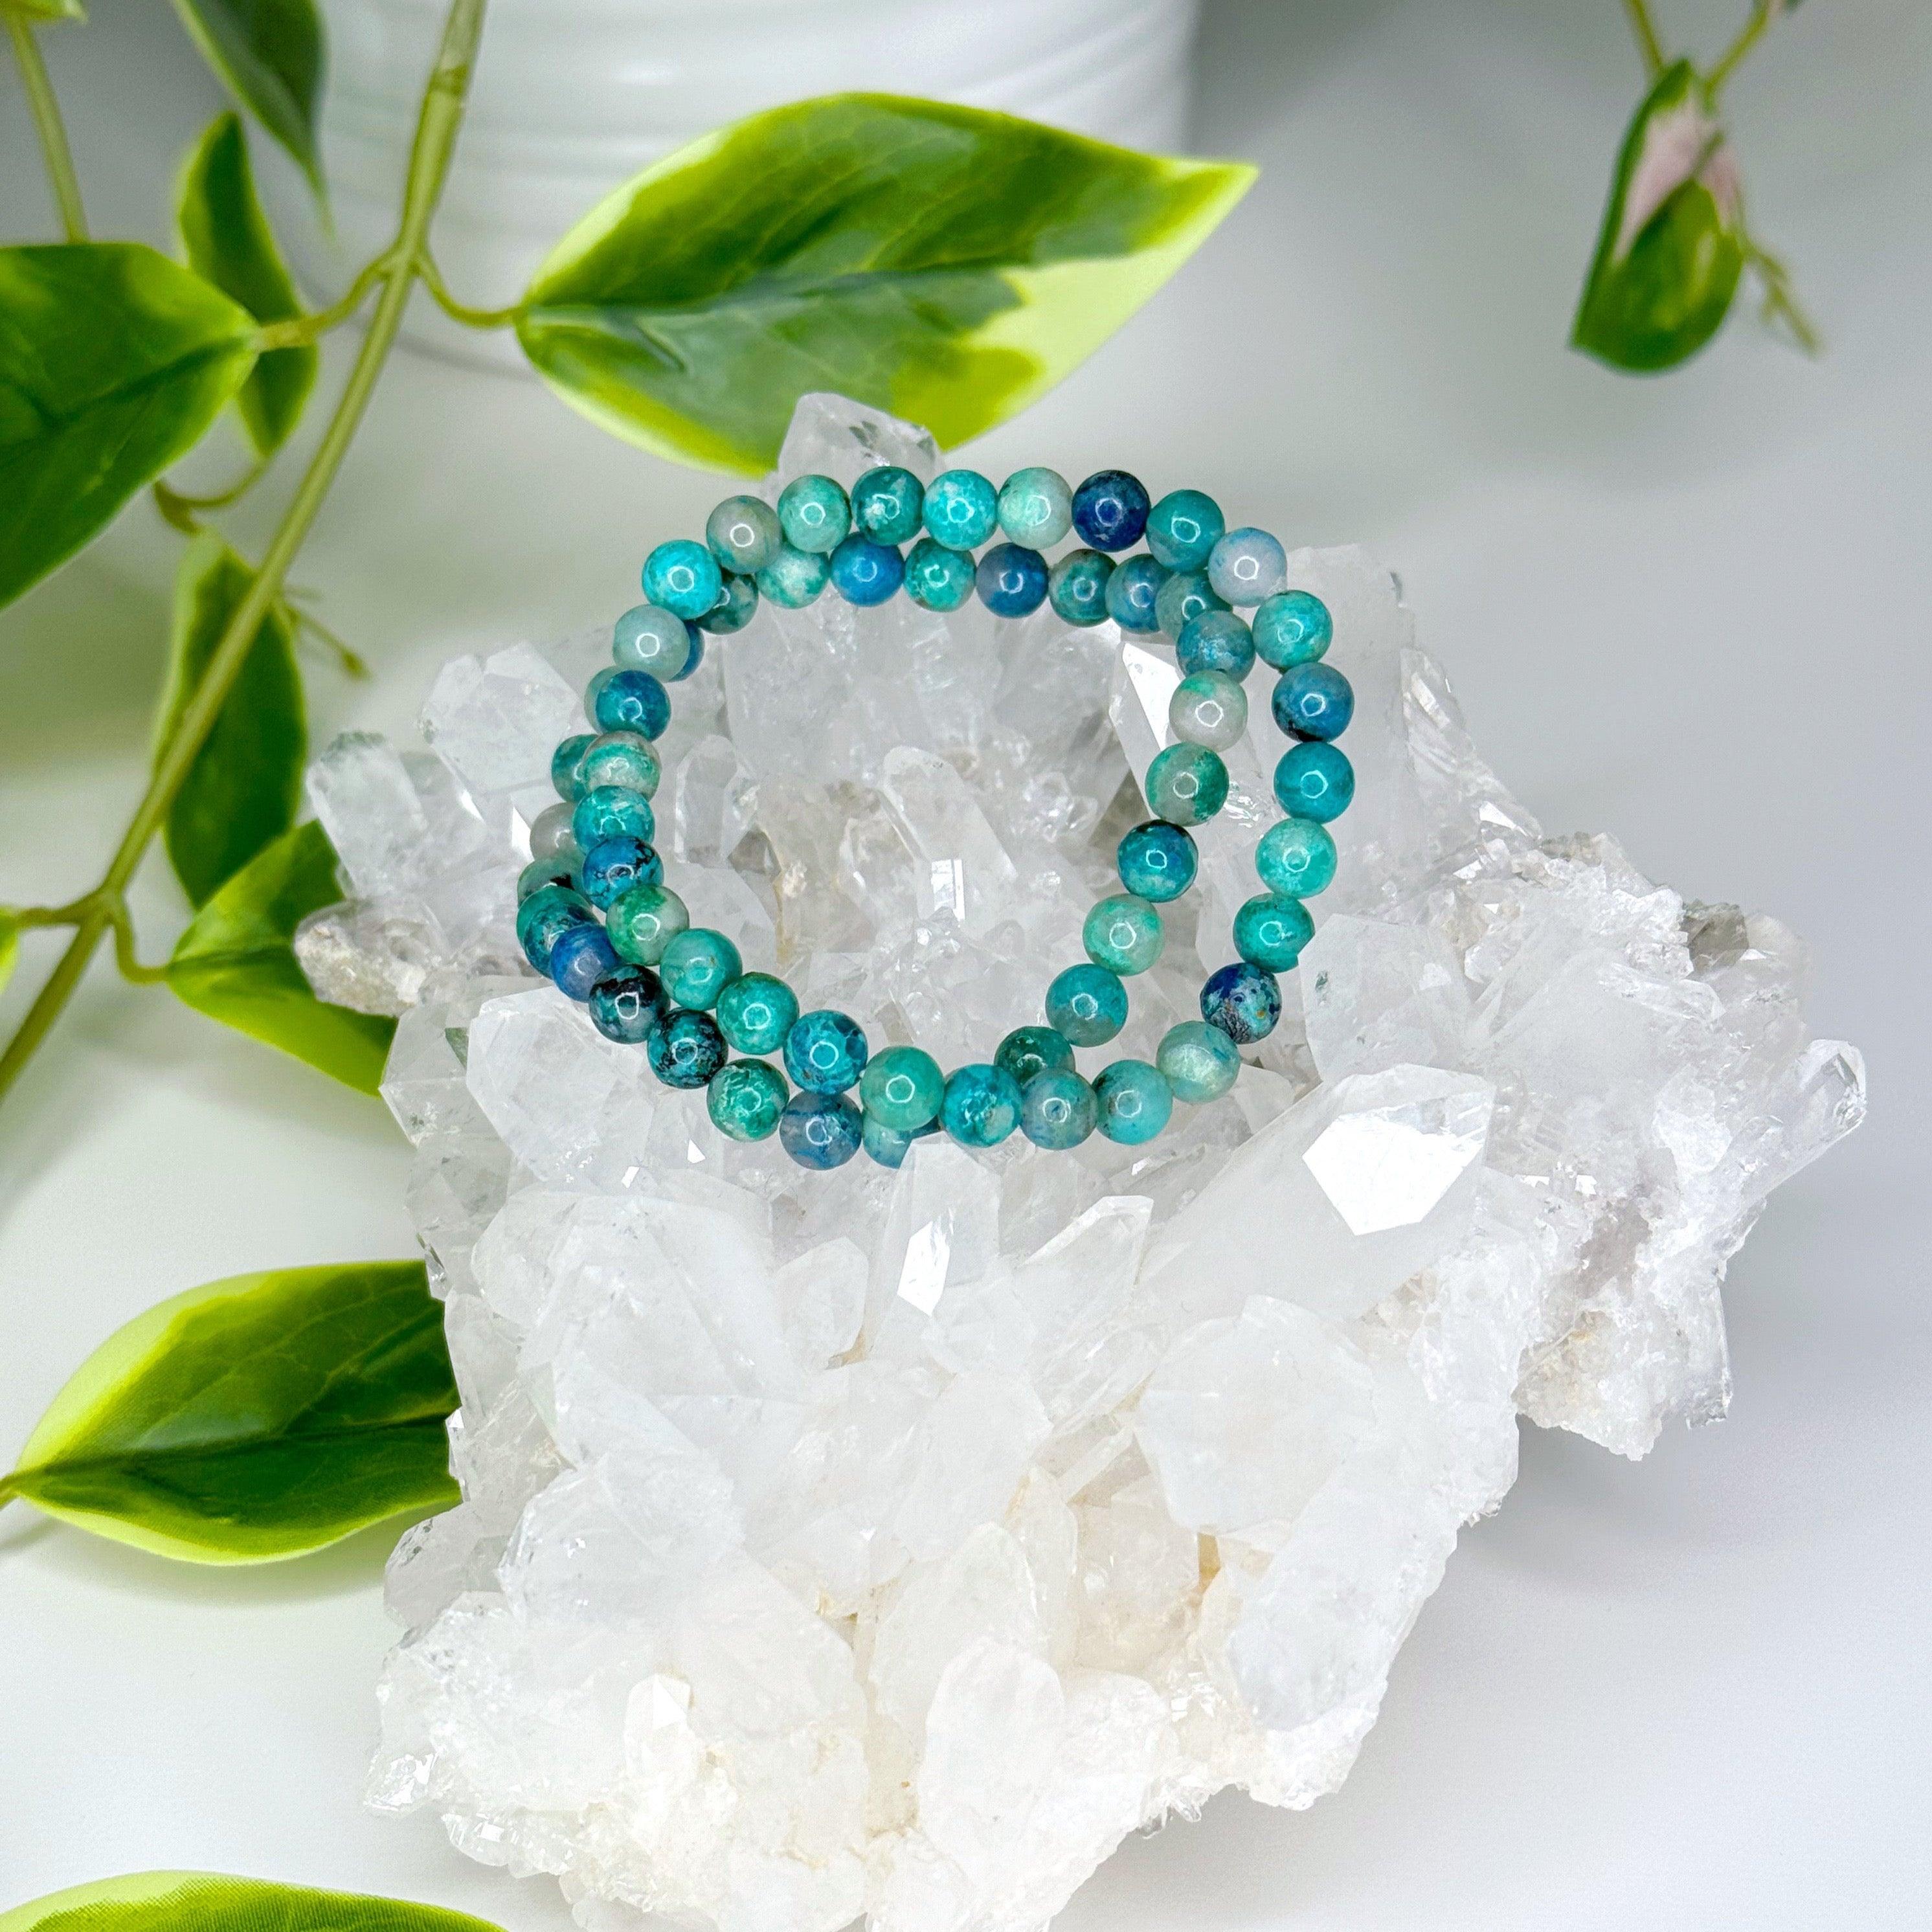 CHRYSOCOLLA IN QUARTZ 6mm - HANDMADE CRYSTAL BRACELET - 6mm, black, blue, bracelet, chrysocolla, crystal bracelet, gemini, gemini stack, green, handmade bracelet, jewelry, obsidian, recently added, scorpio, scorpio stack, silver sheen obsidian, spring collection, virgo, virgo stack, water, Wearable - The Mineral Maven